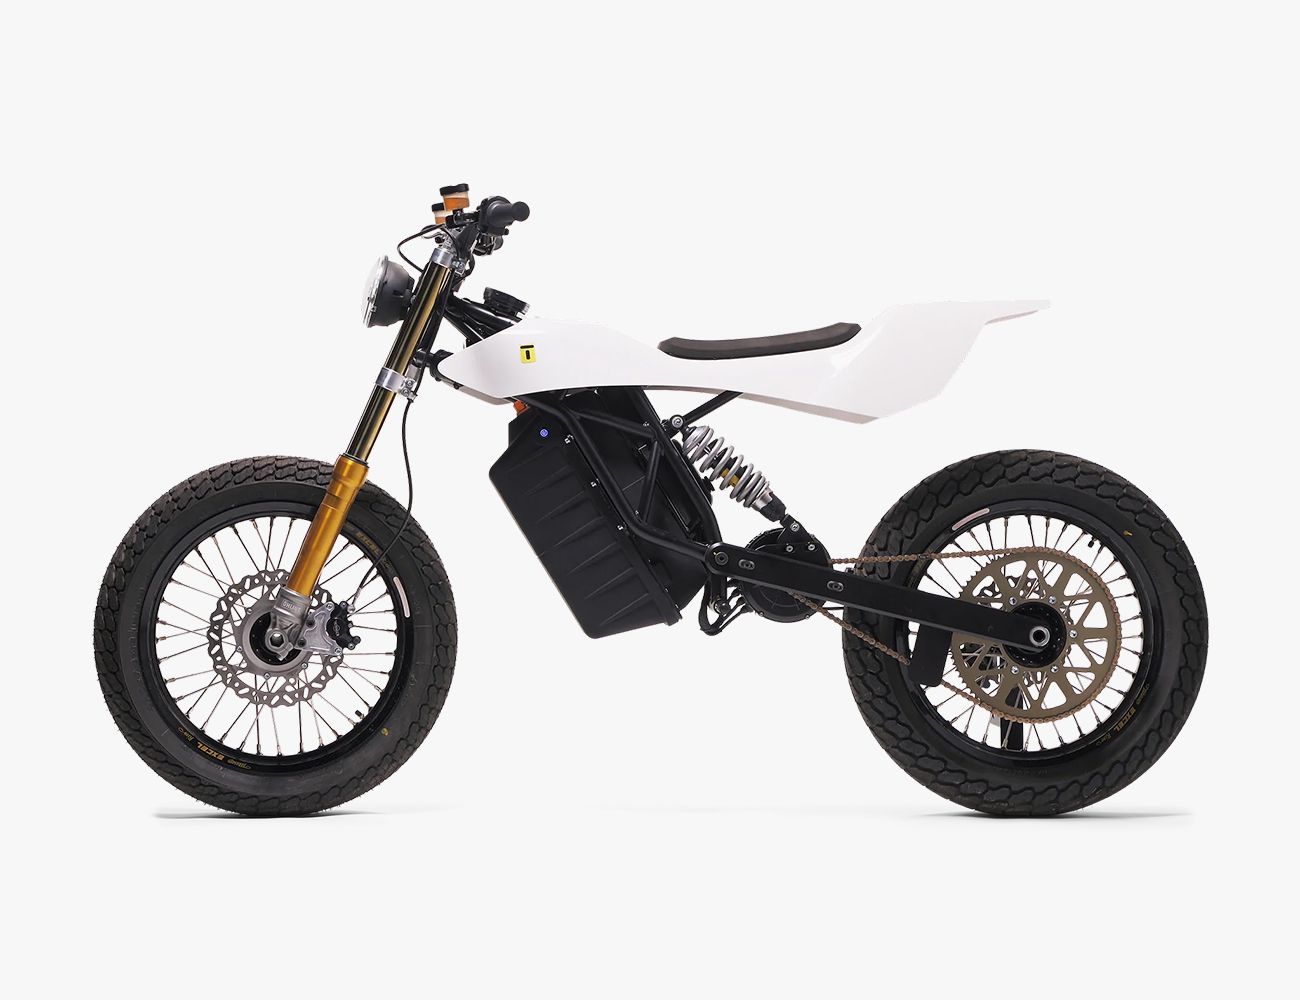 The Best Electric Dirt Bikes Zero, Cake, Segway and More